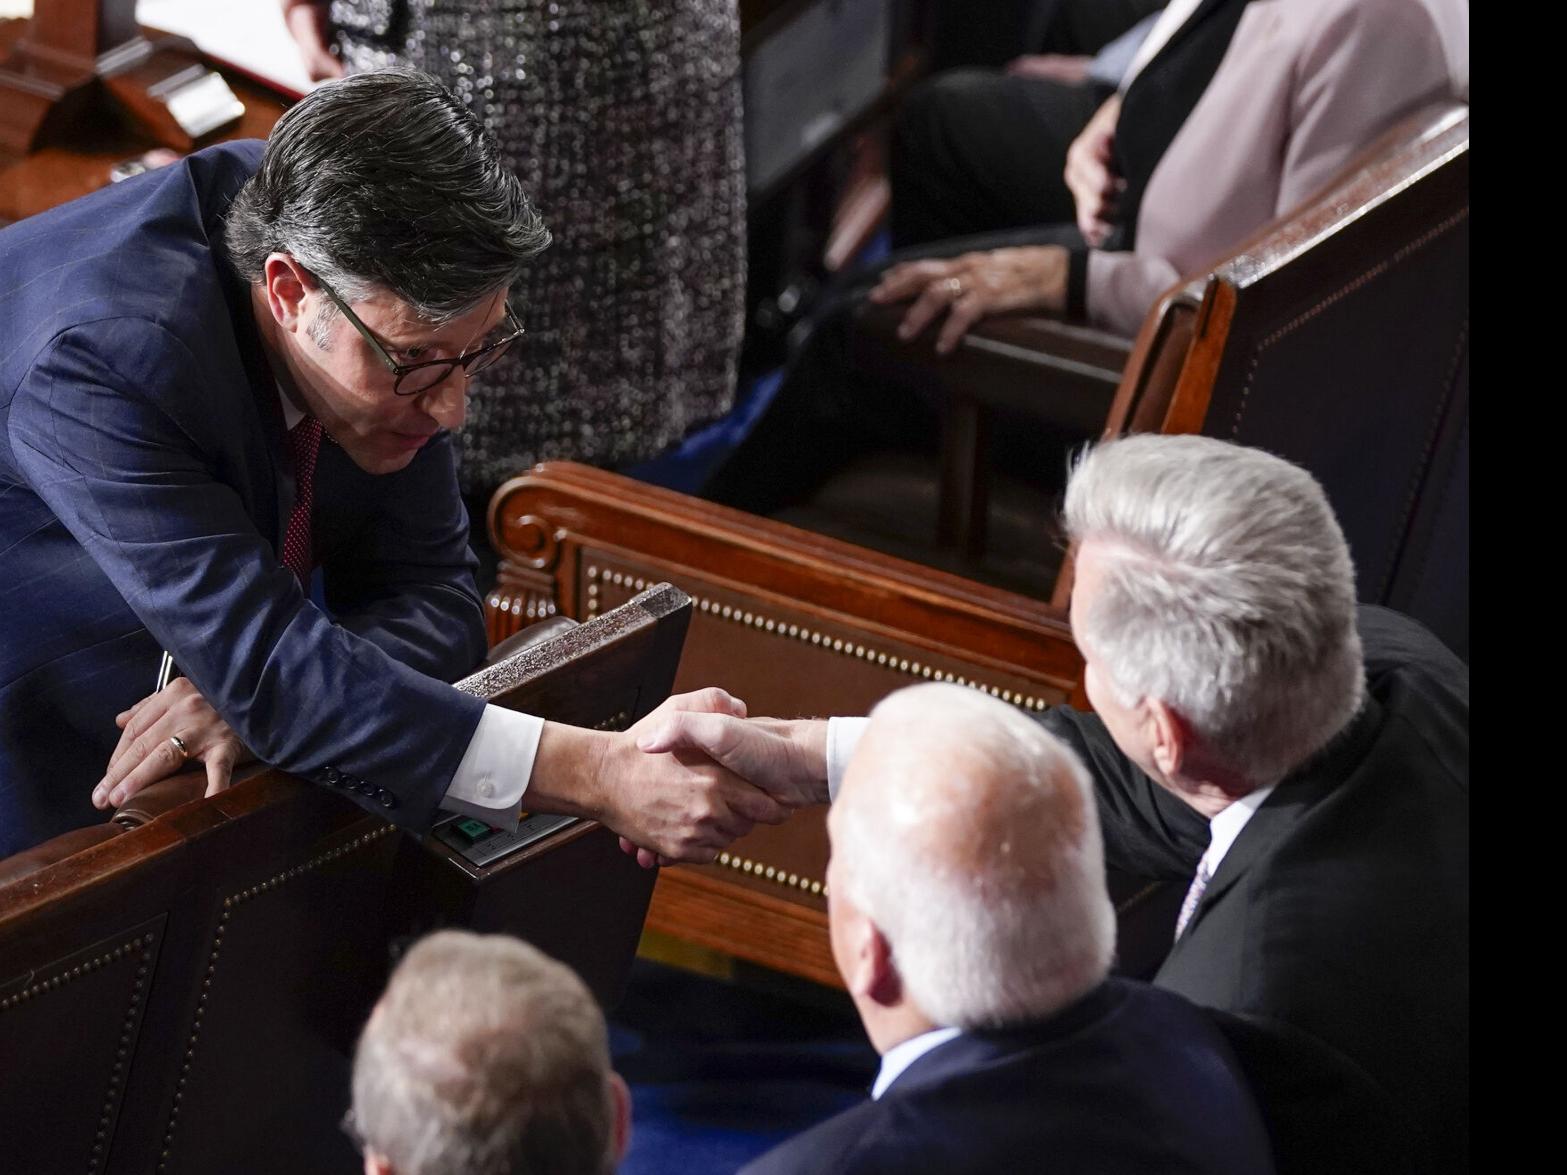 5 things to know on Mike Johnson, the new speaker of the House